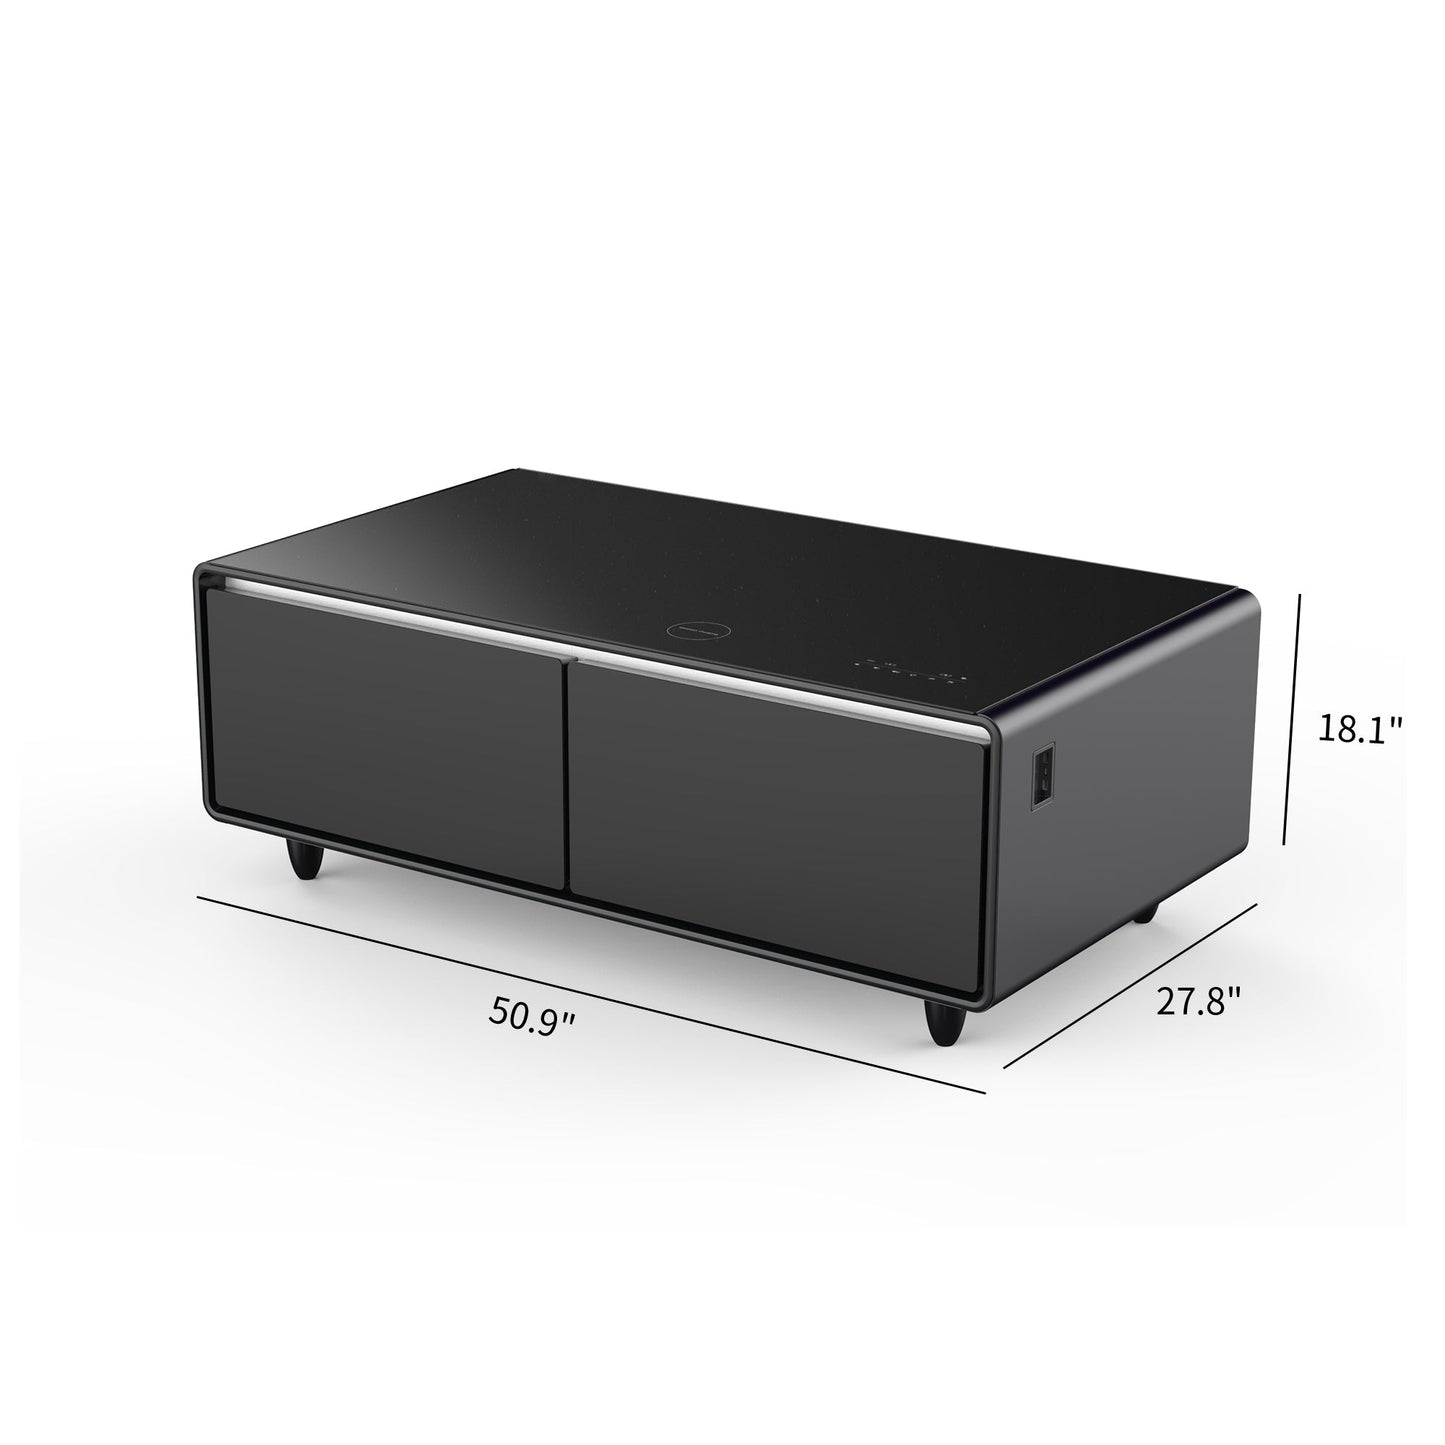 Modern Smart Coffee Table with Built-in Fridge, Bluetooth Speaker, Wireless Charging Module, Touch Control Panel, Power Socket, USB Interface, Outlet Protection, Atmosphere light, Black